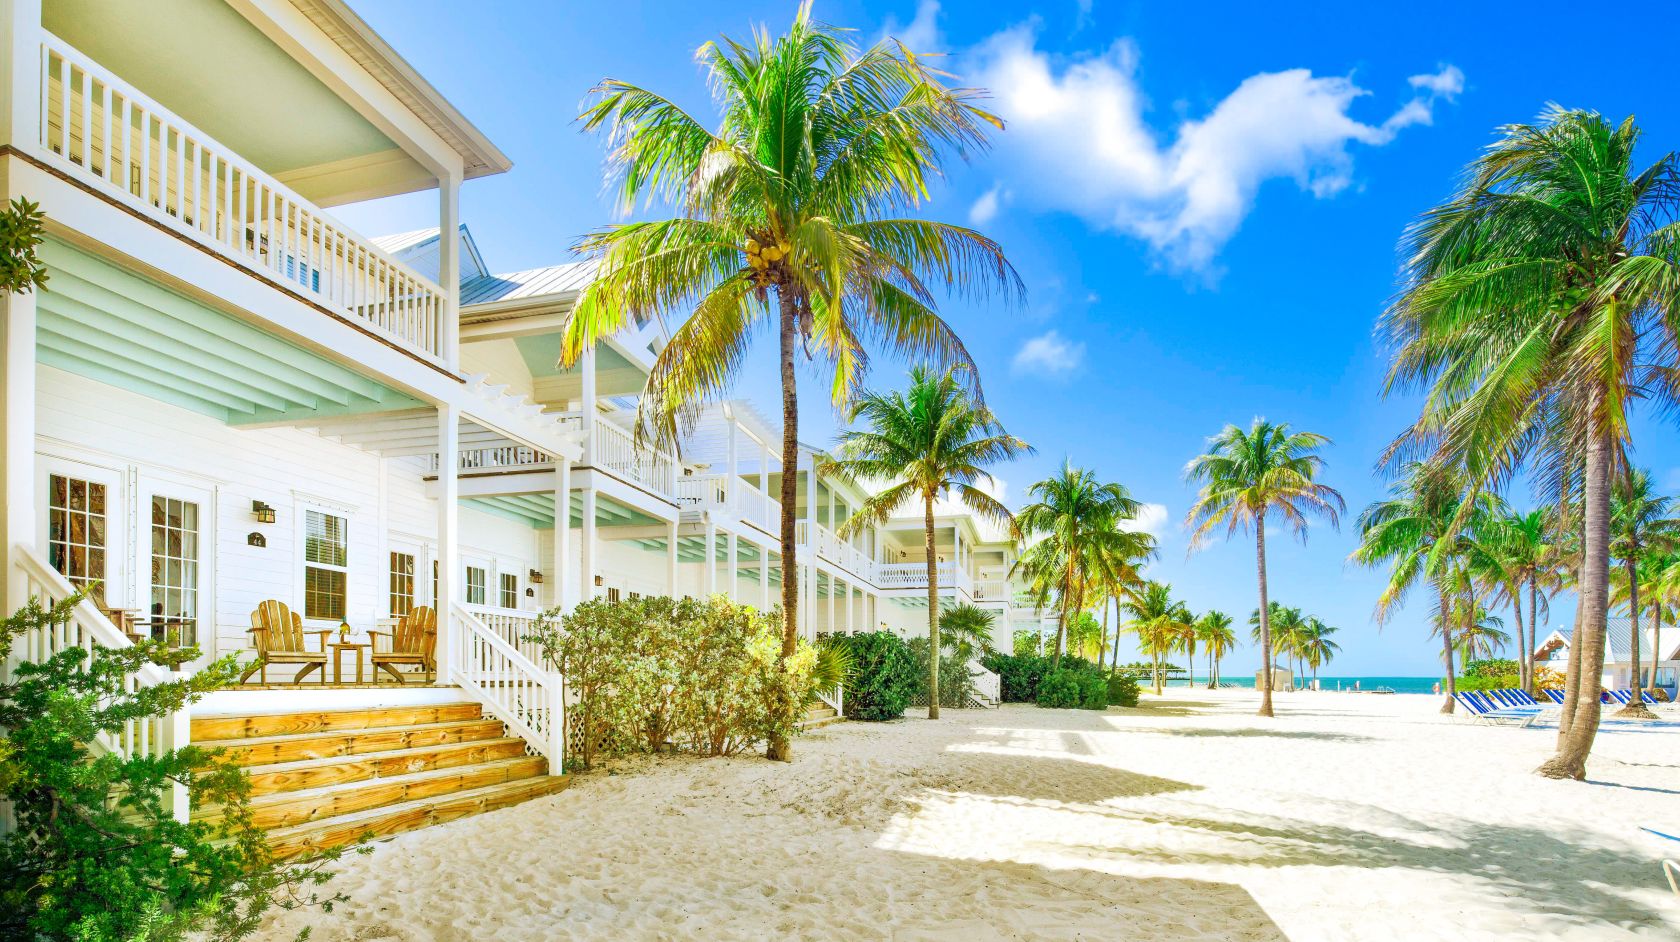 Waterfront Cottages in the Florida Keys